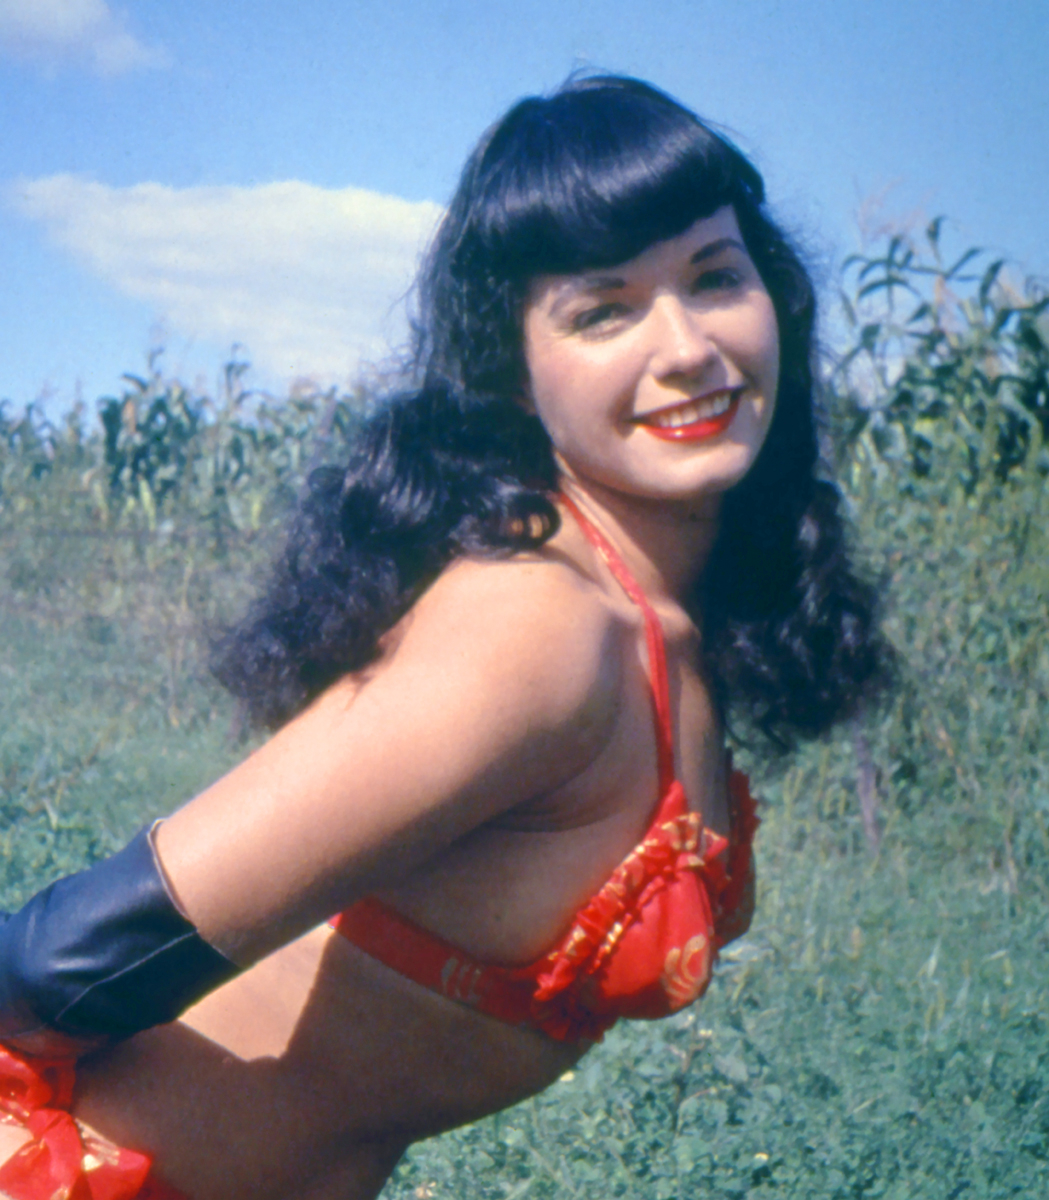 donna parkman add black haired pin up girl photo